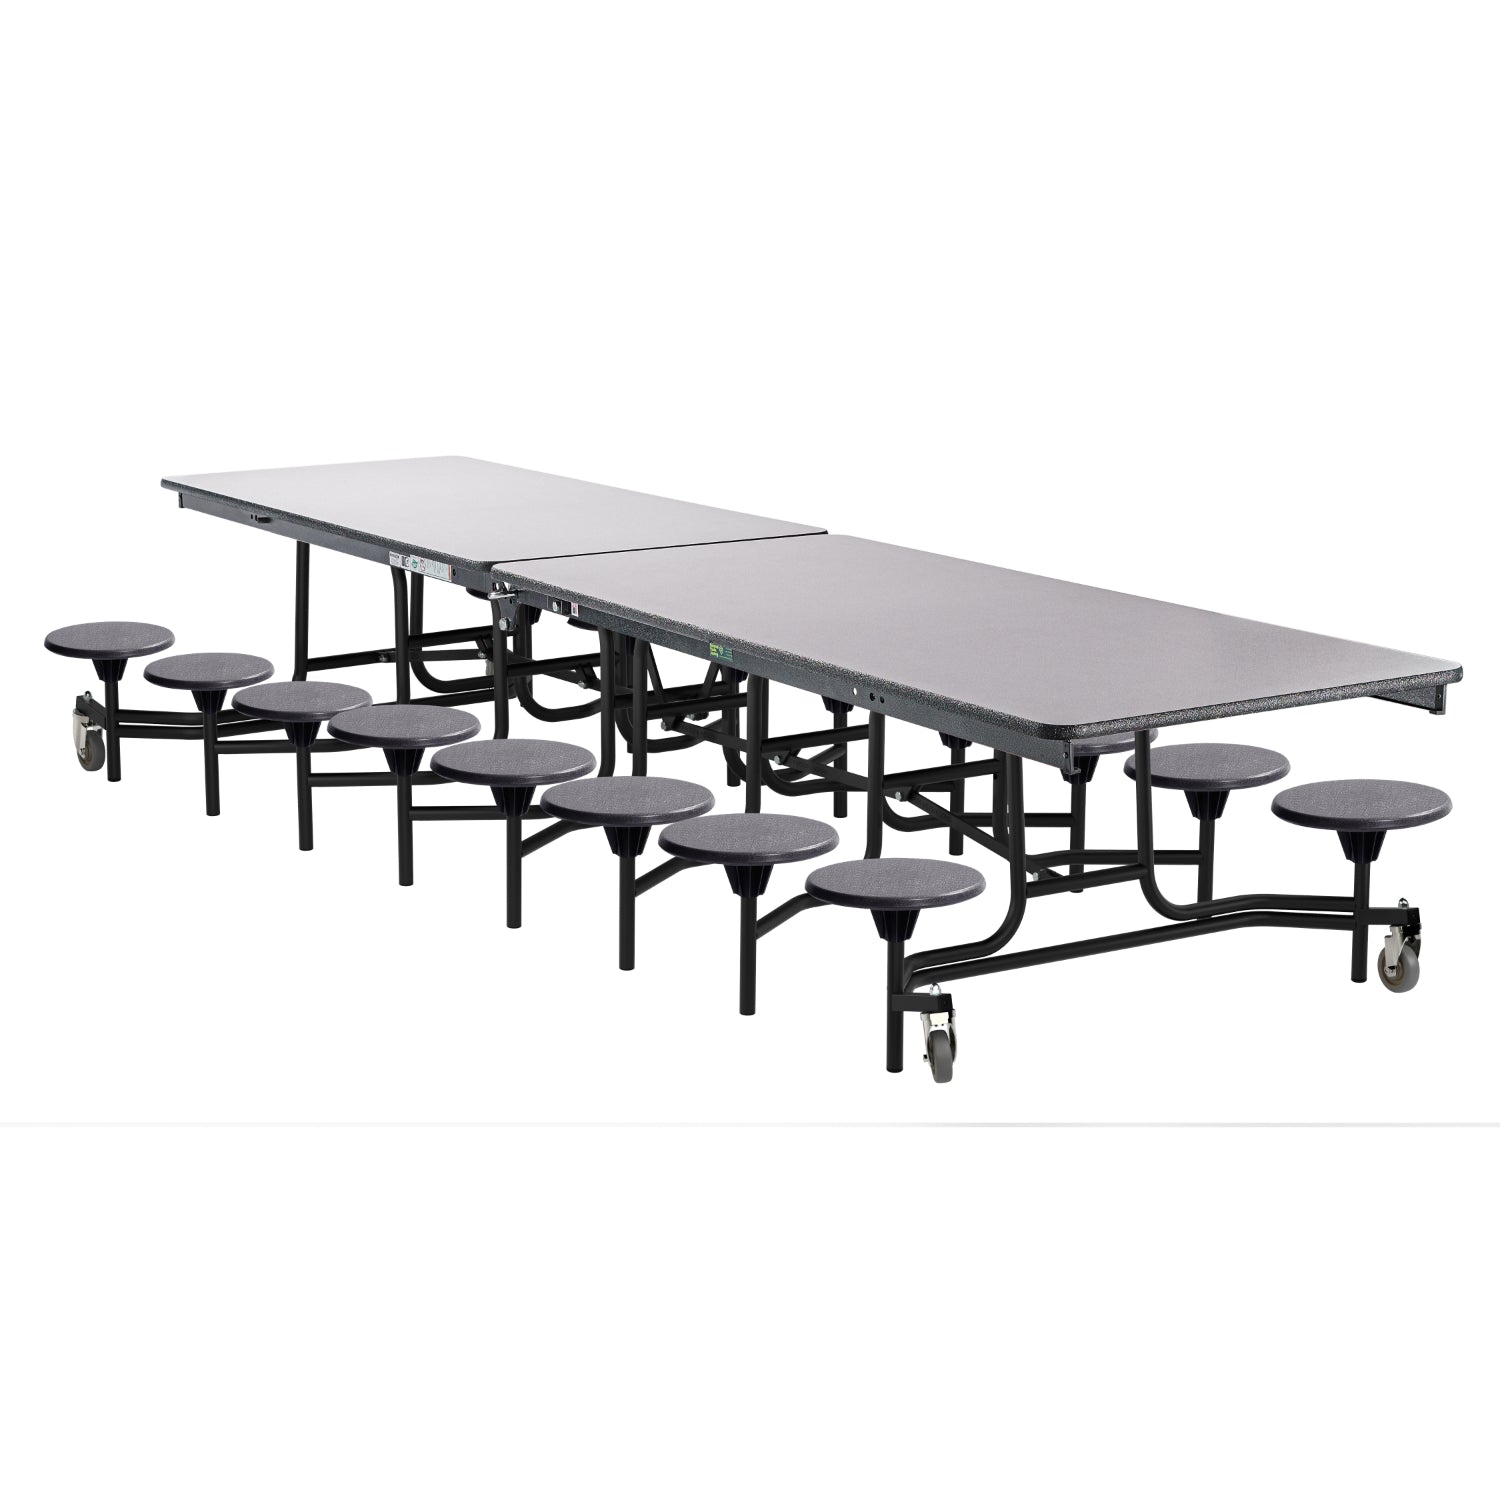 Mobile Cafeteria Table with 16 Stools, 12'L Rectangular, Particleboard Core, Vinyl T-Mold Edge, Textured Black Frame